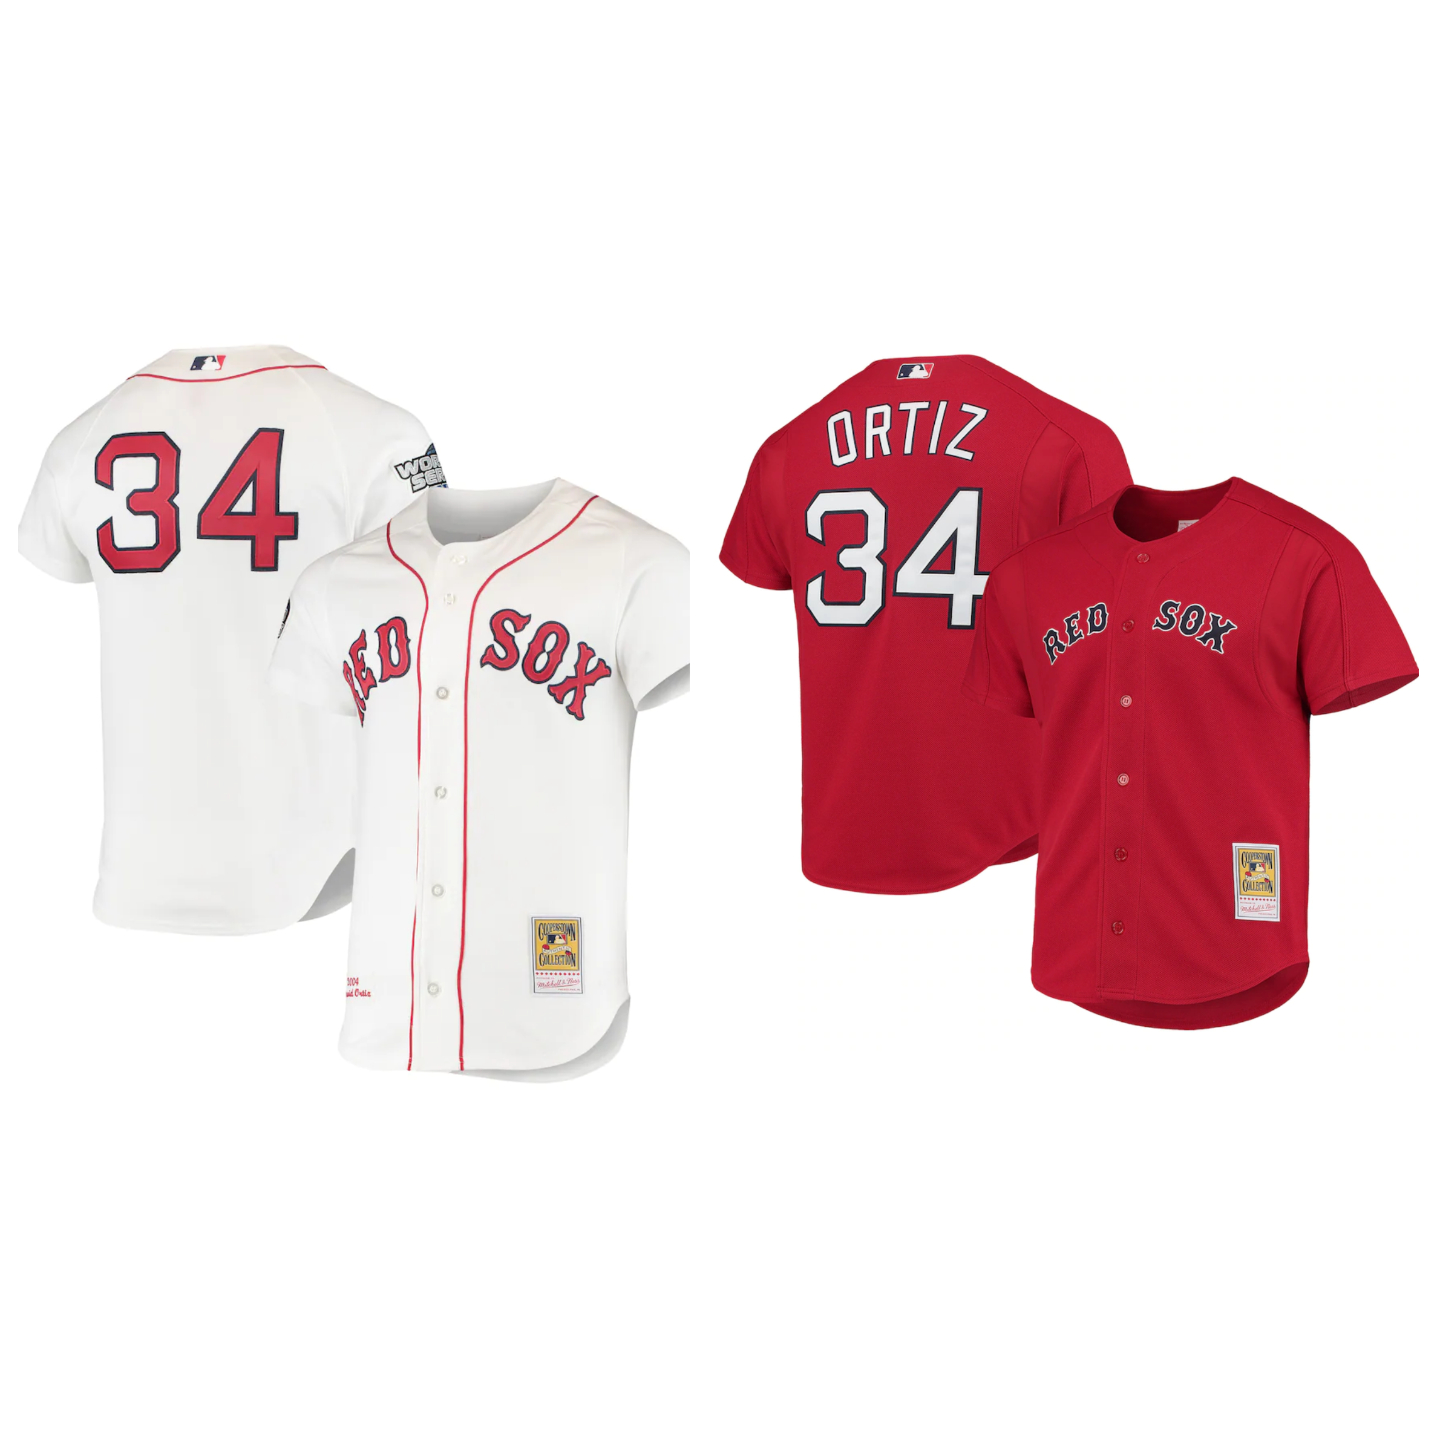 David Ortiz Hall of Fame induction: Where to buy Big Papi T-Shirts,  jerseys, signed memorabilia and more online 